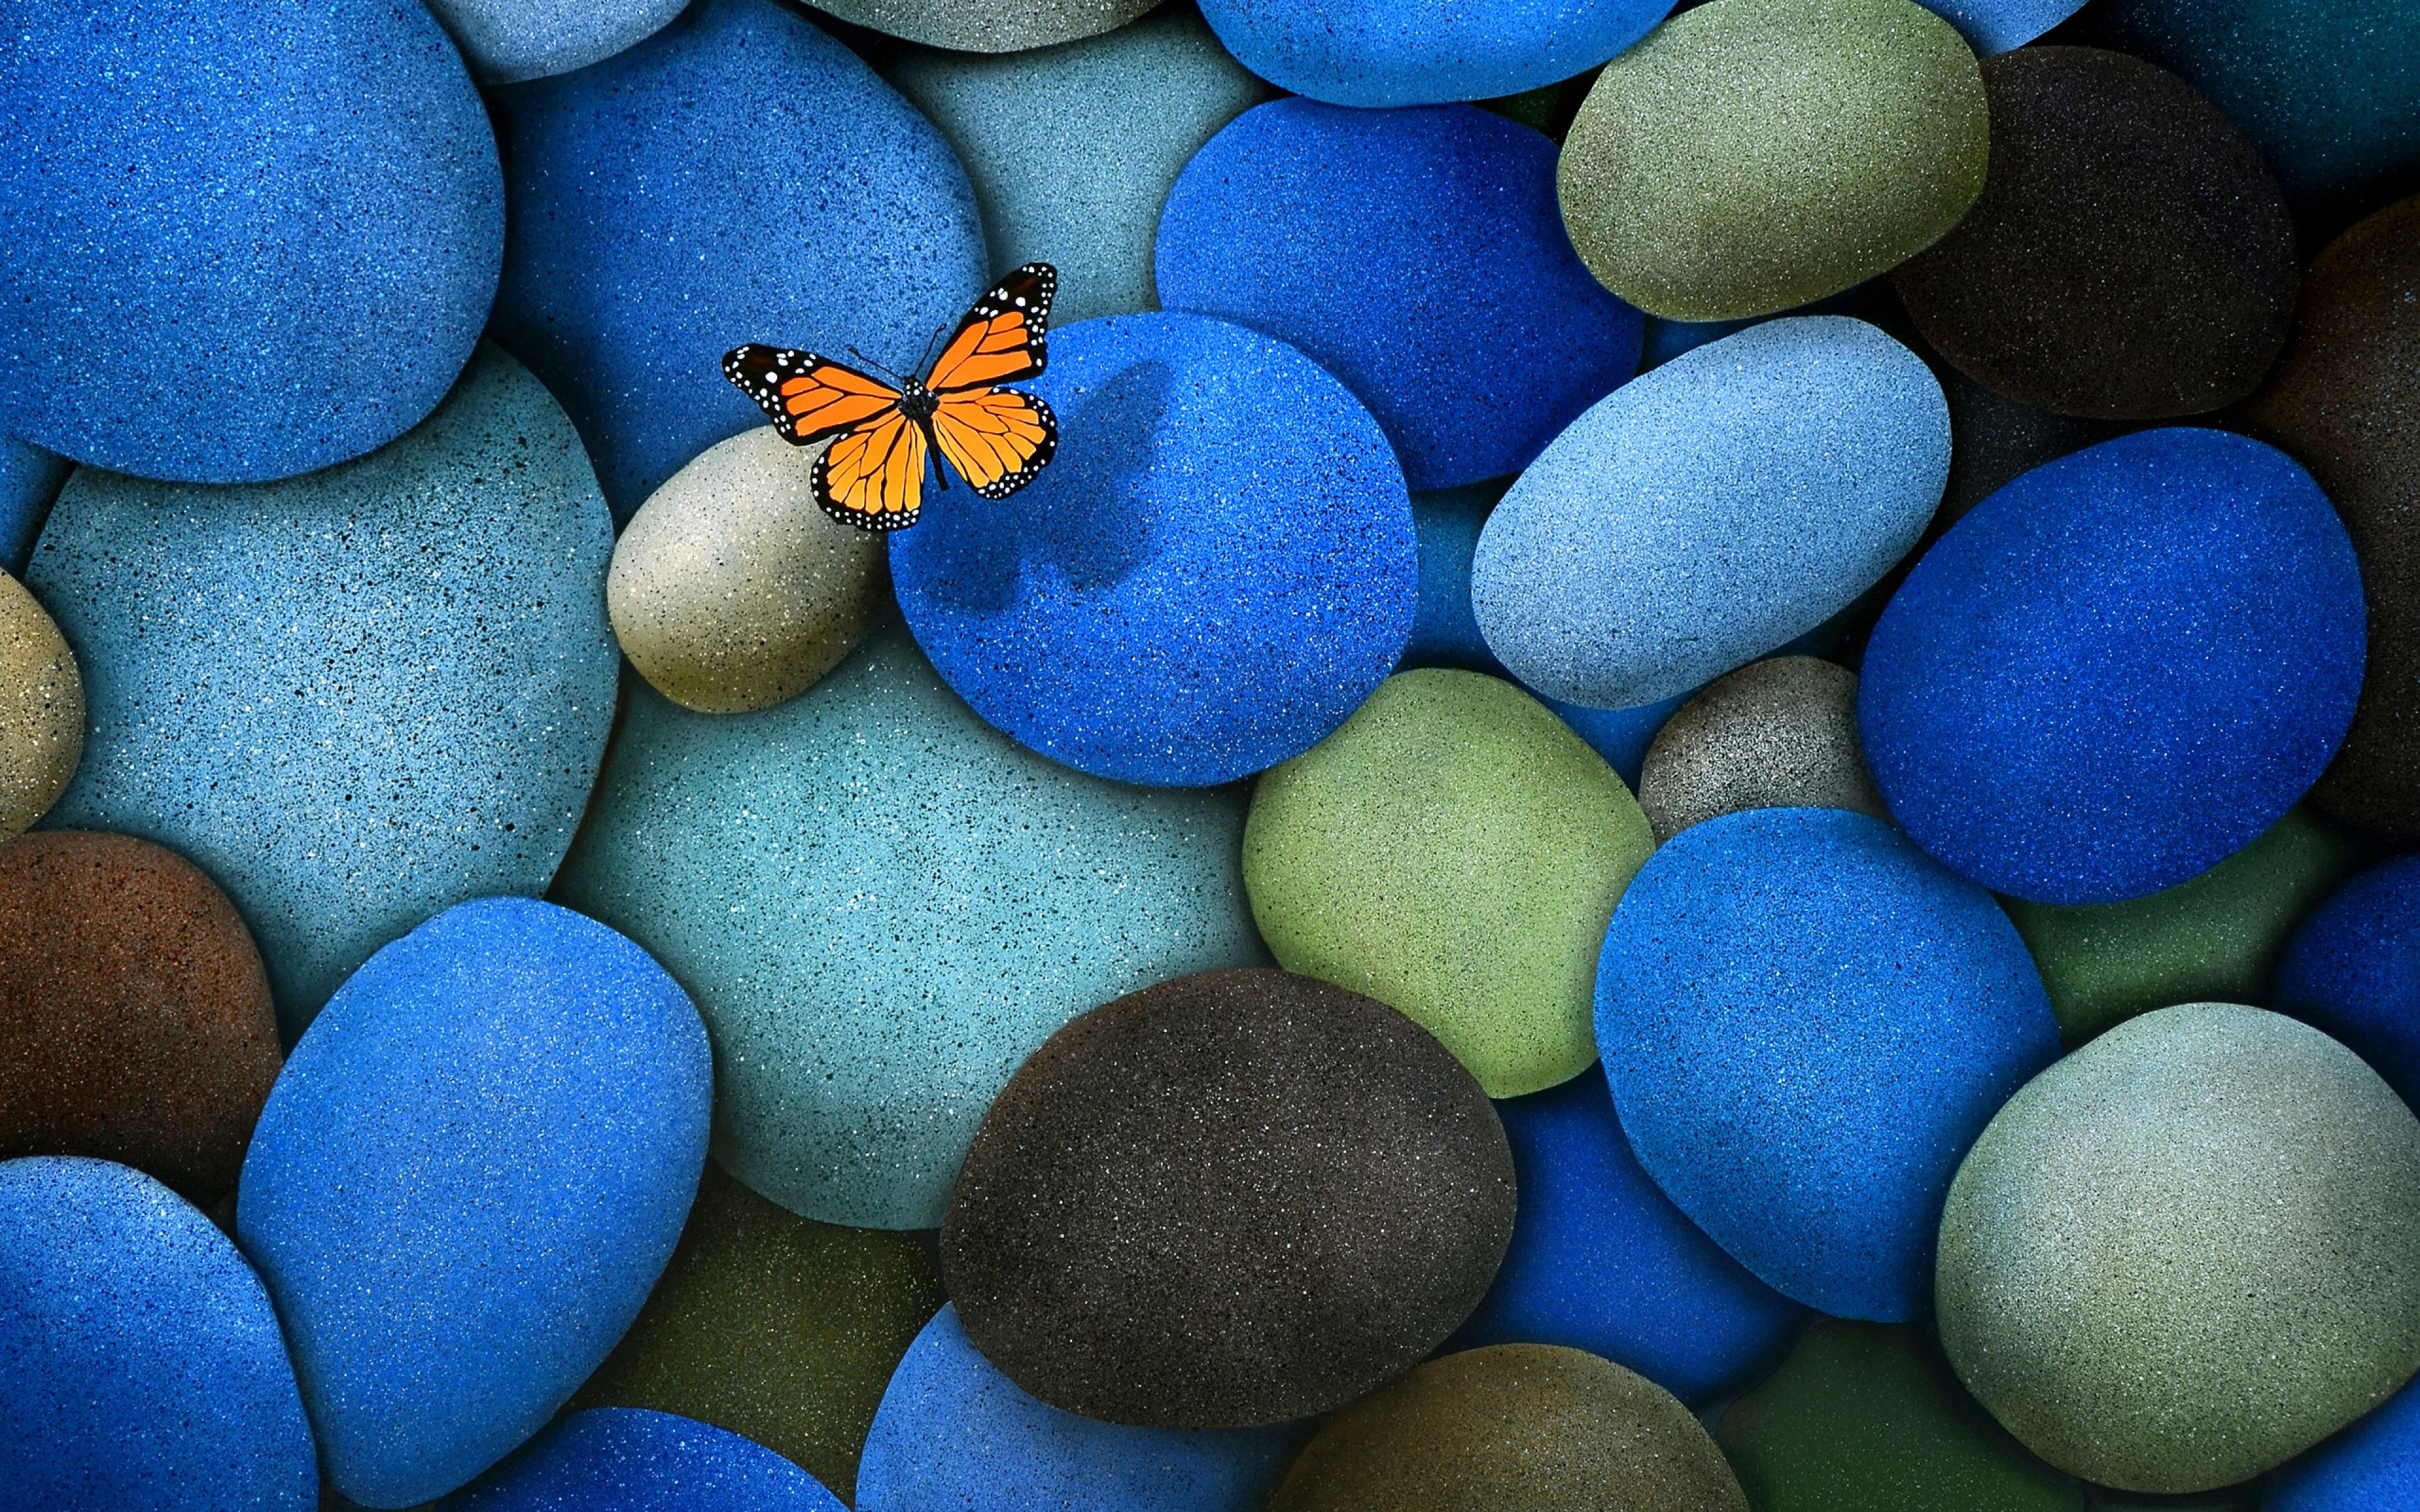 Wallpapers stones butterfly nature on the desktop